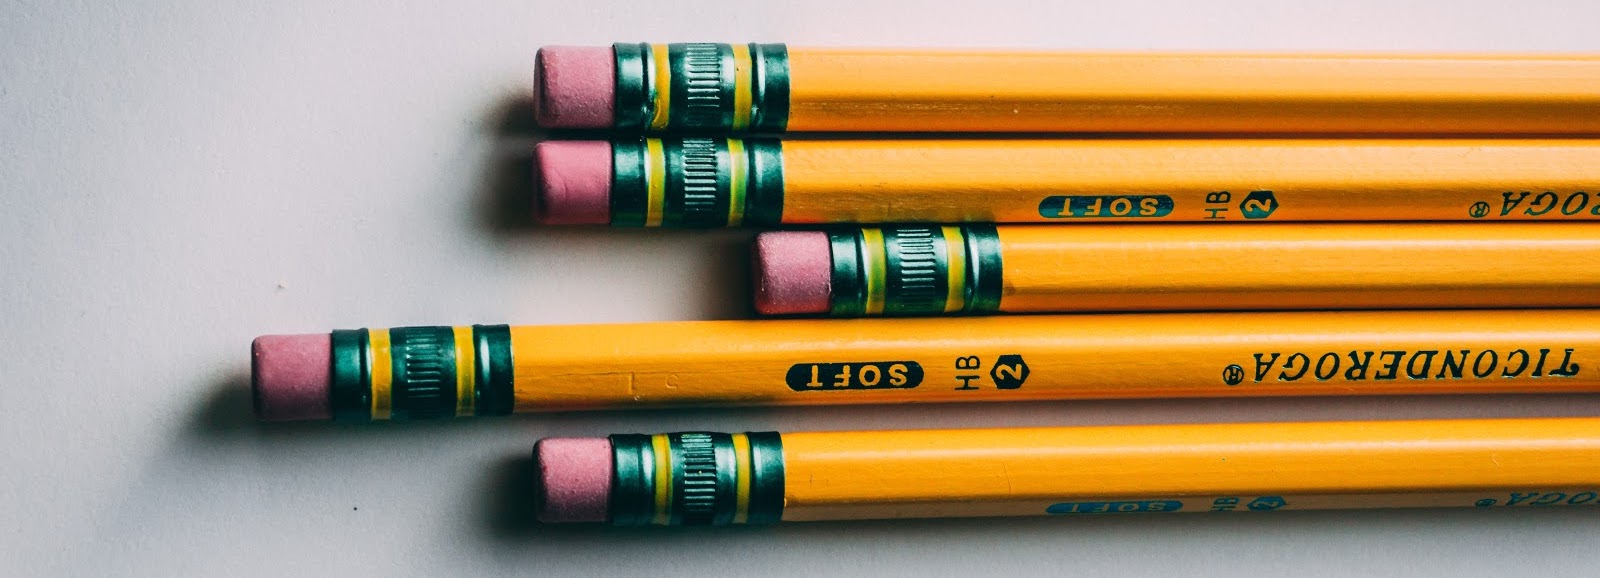 Pencils laying side-by-side.